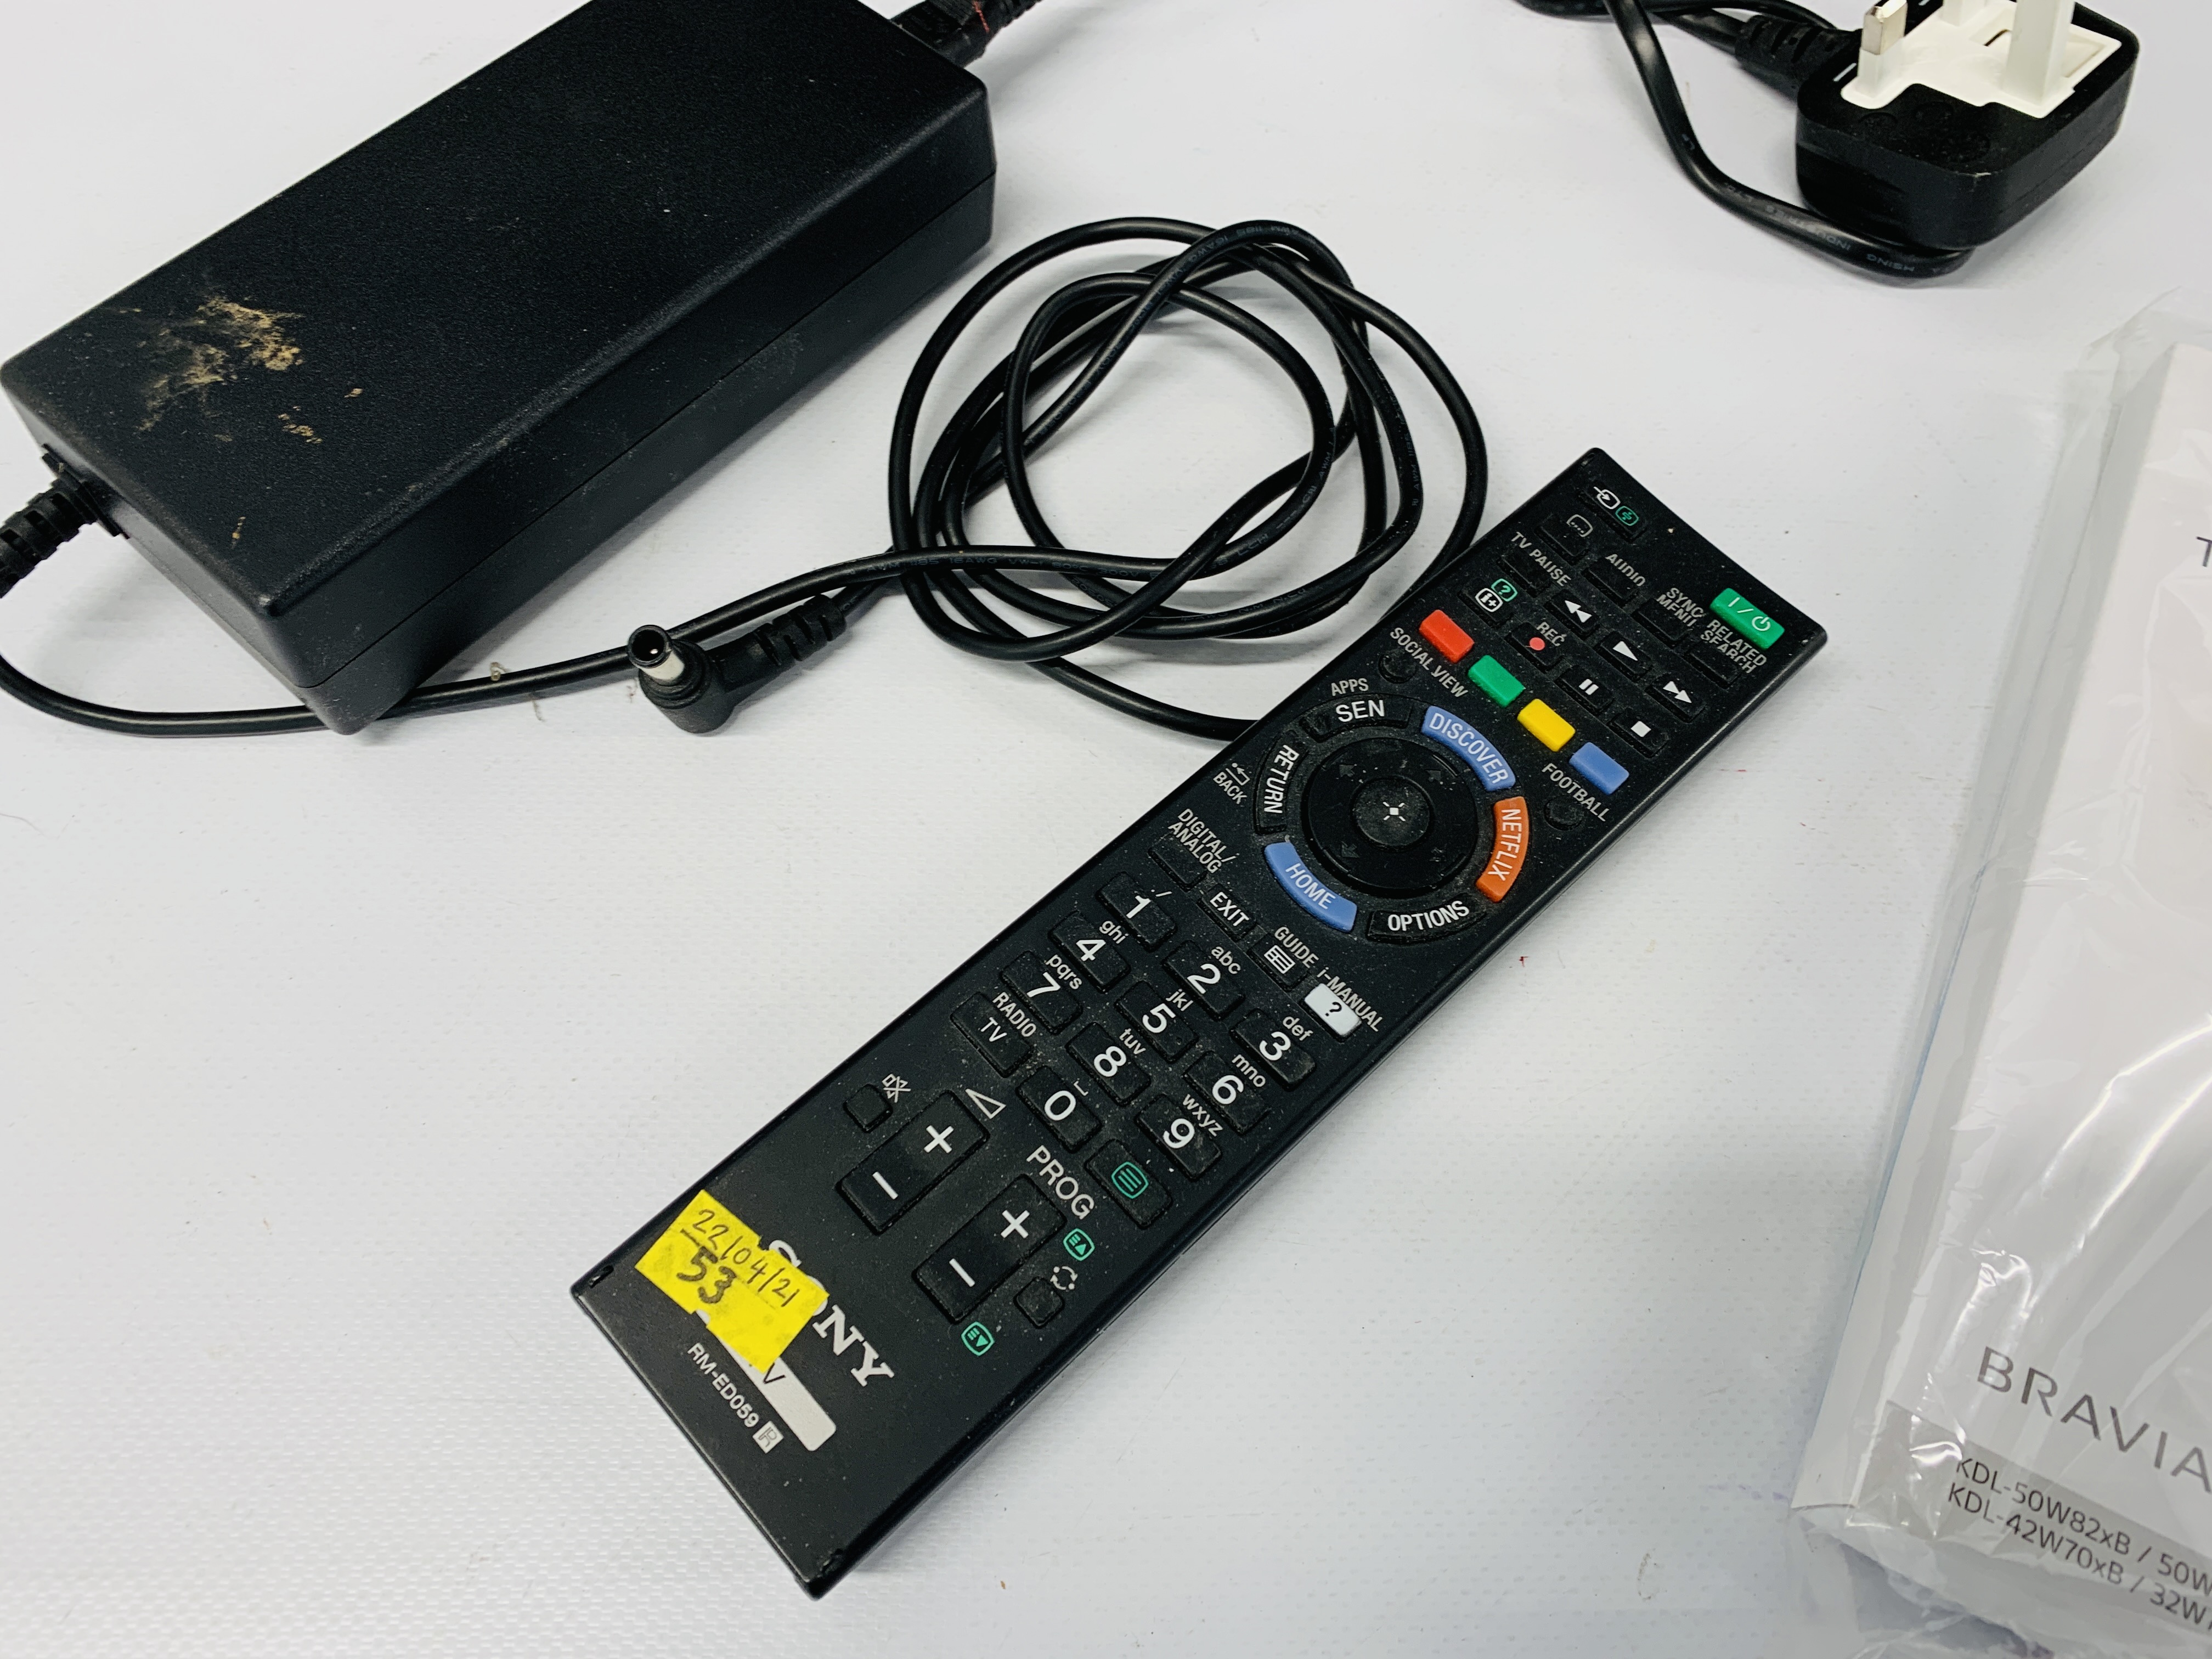 A SONY BRAVIA 32 INCH SMART TELEVISION MODEL KDL - 32W705B (REMOTE WITH AUCTIONEER) - SOLD AS SEEN - Image 5 of 9